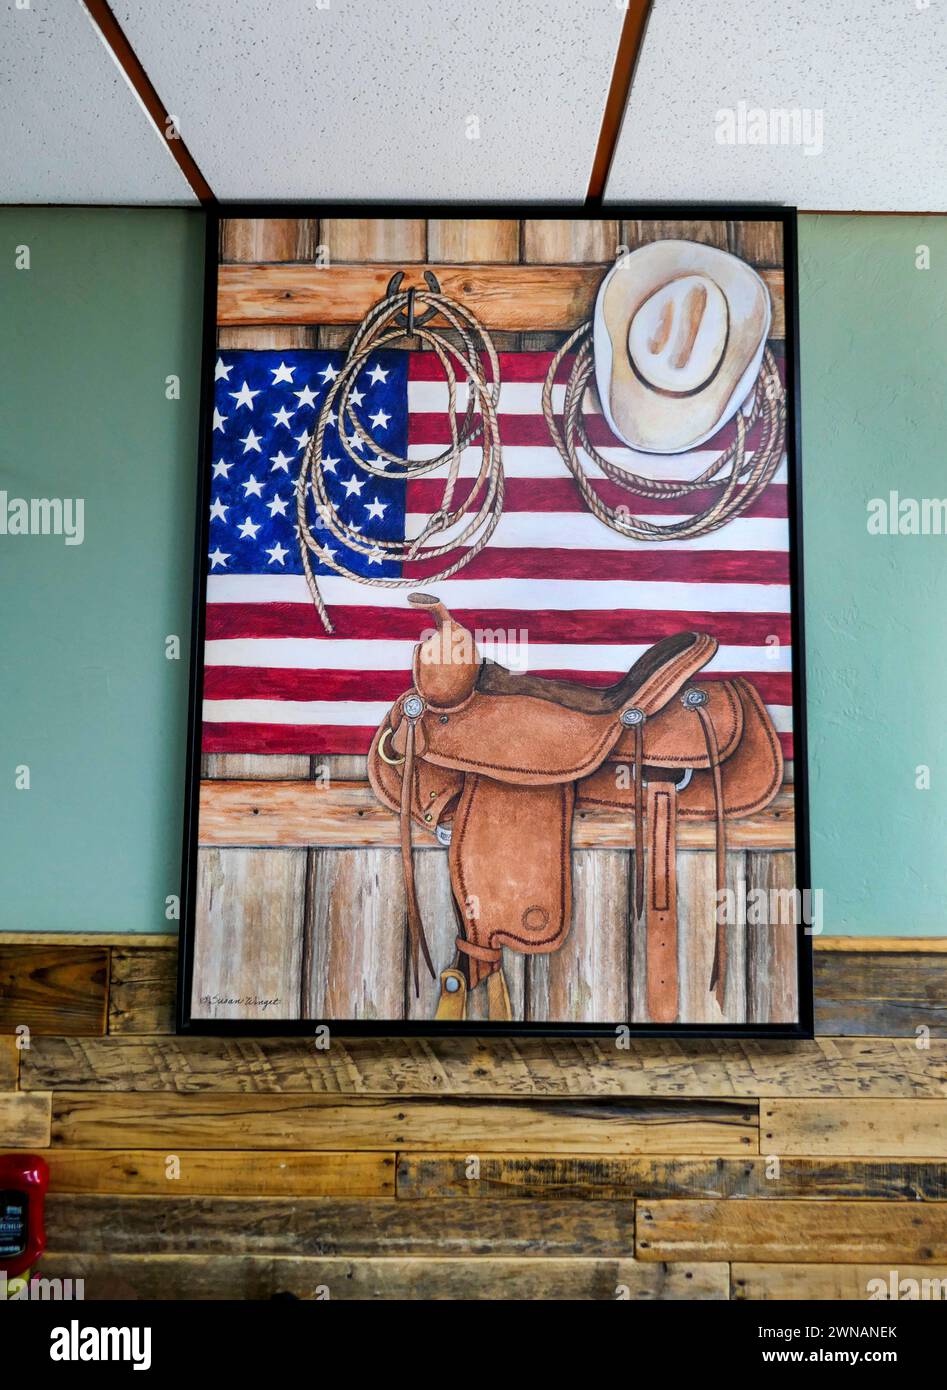 Cowboy painting and other Western decorations in a local restaurant in North Central Florida. Painting is by artist Susan Winget. Stock Photo